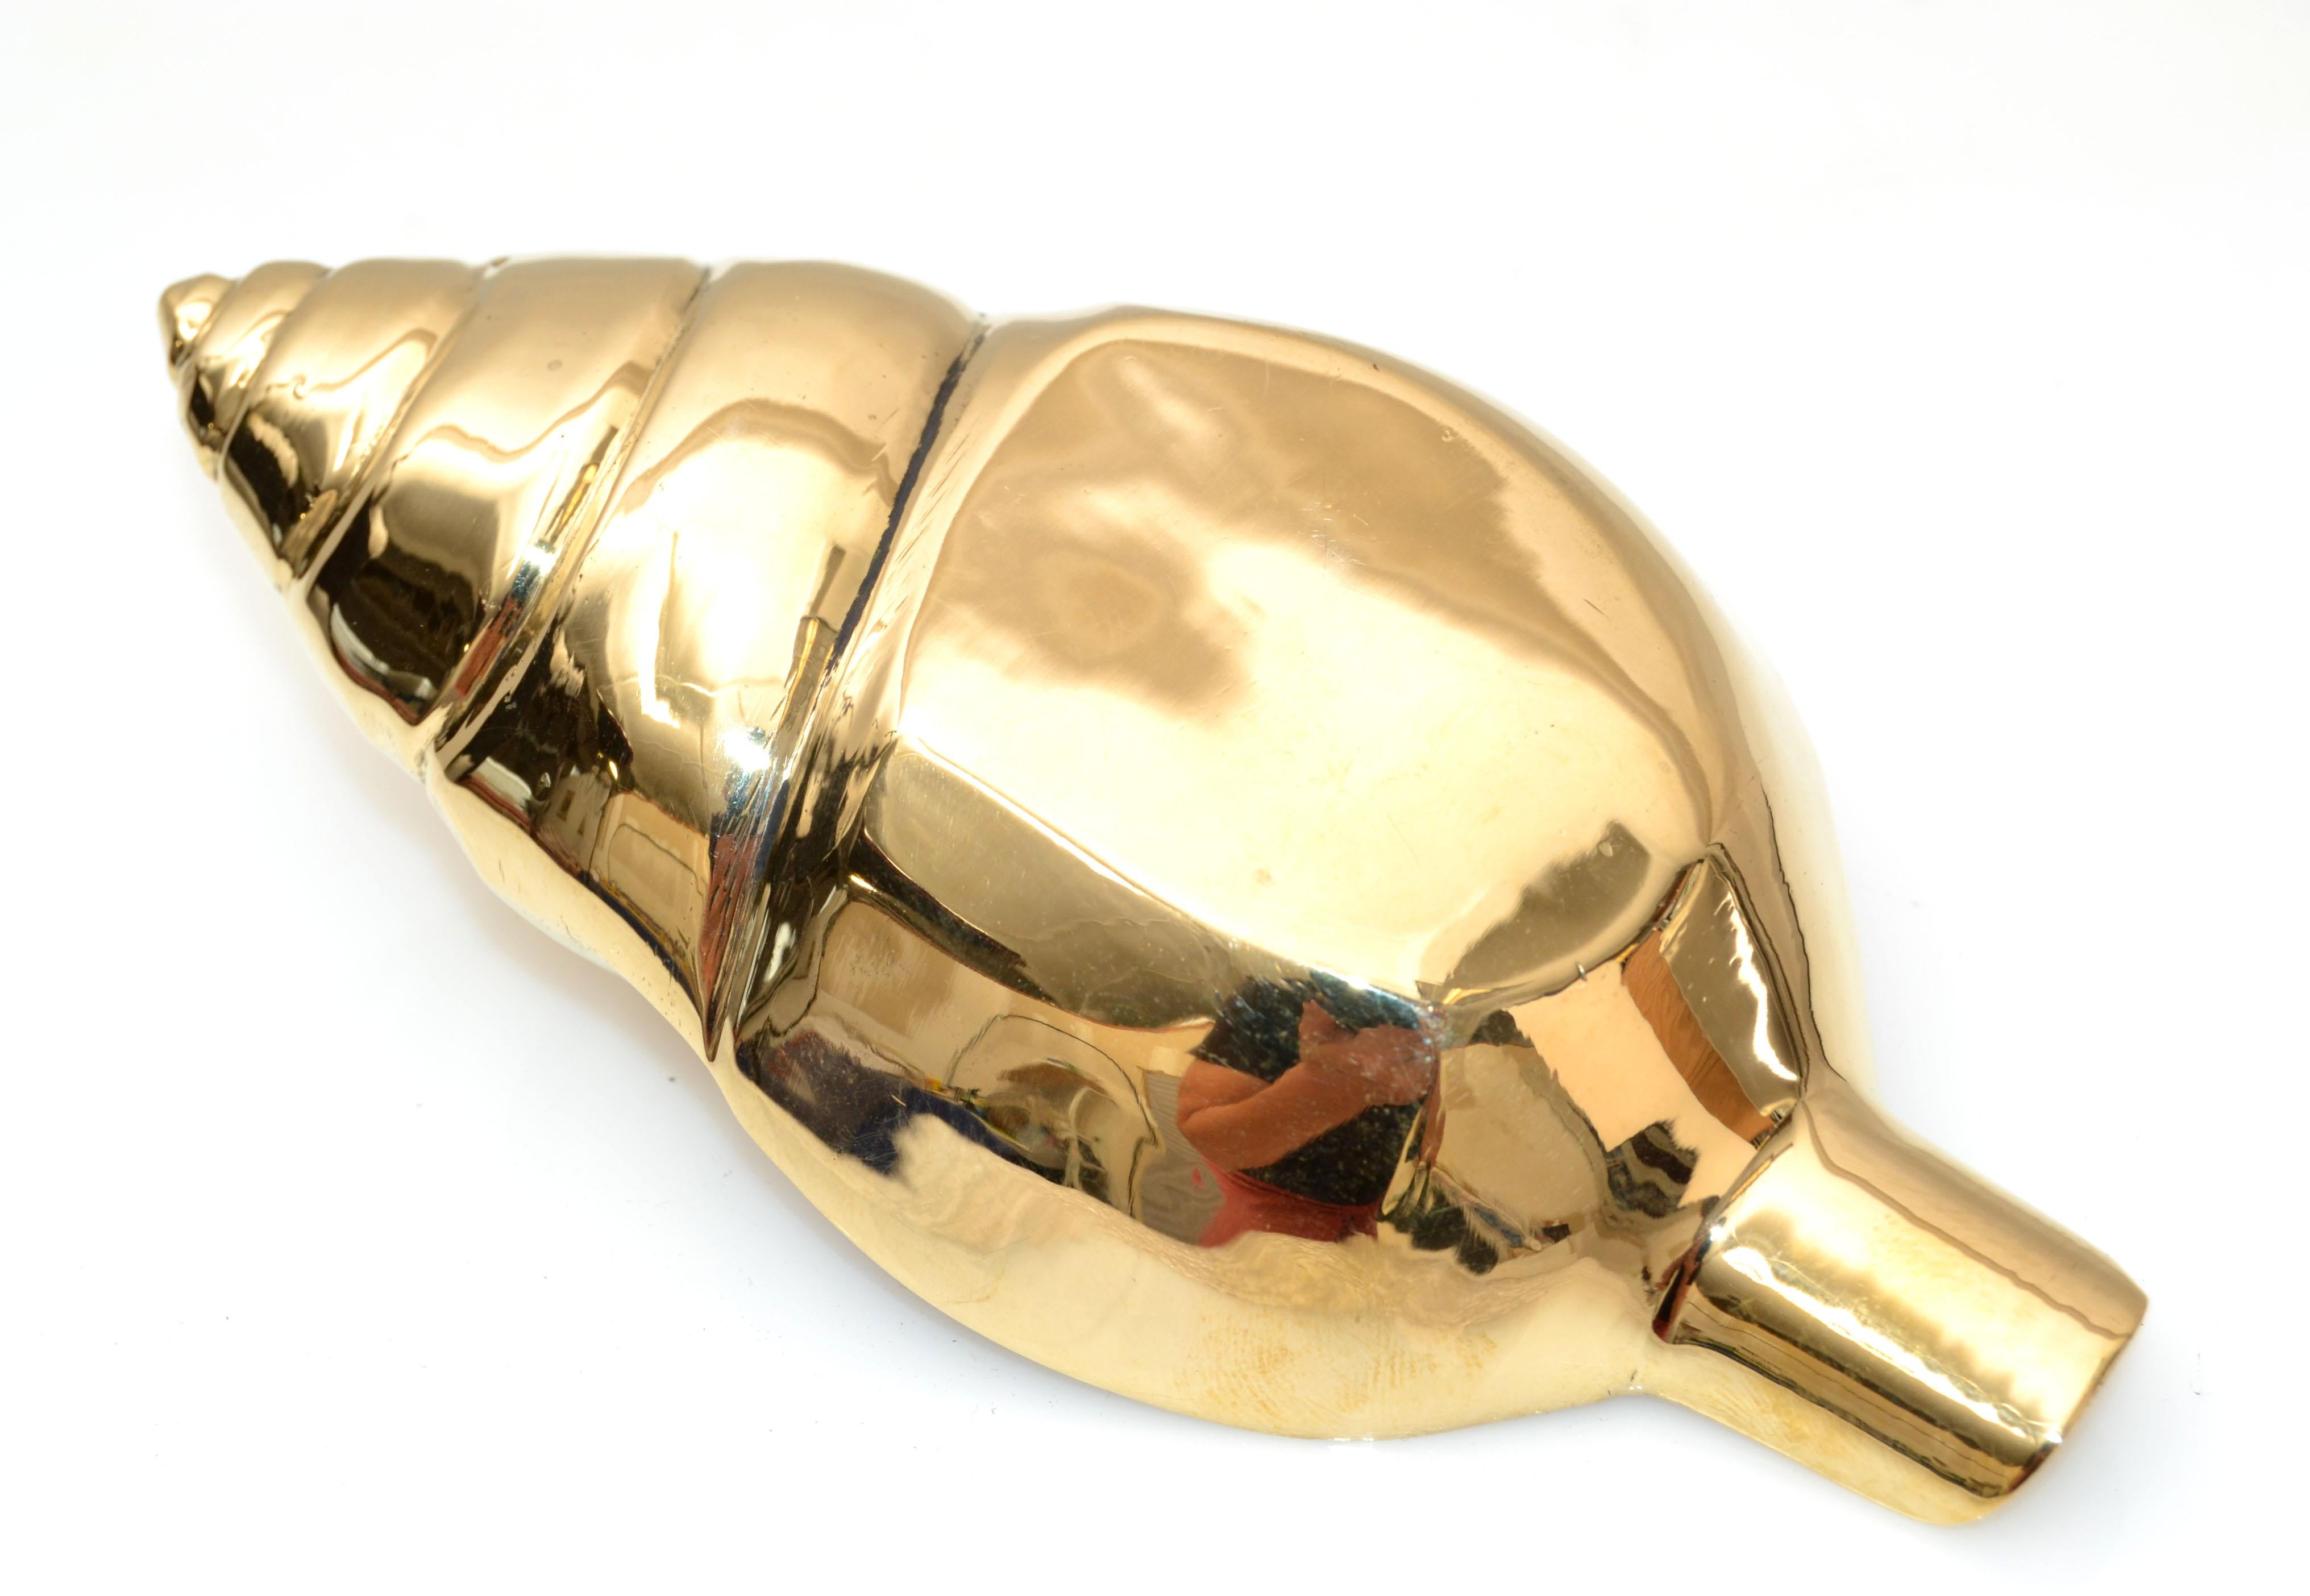 Nautical Polished Brass Seashell Ashtray Sculpture Mid-Century Modern For Sale 3